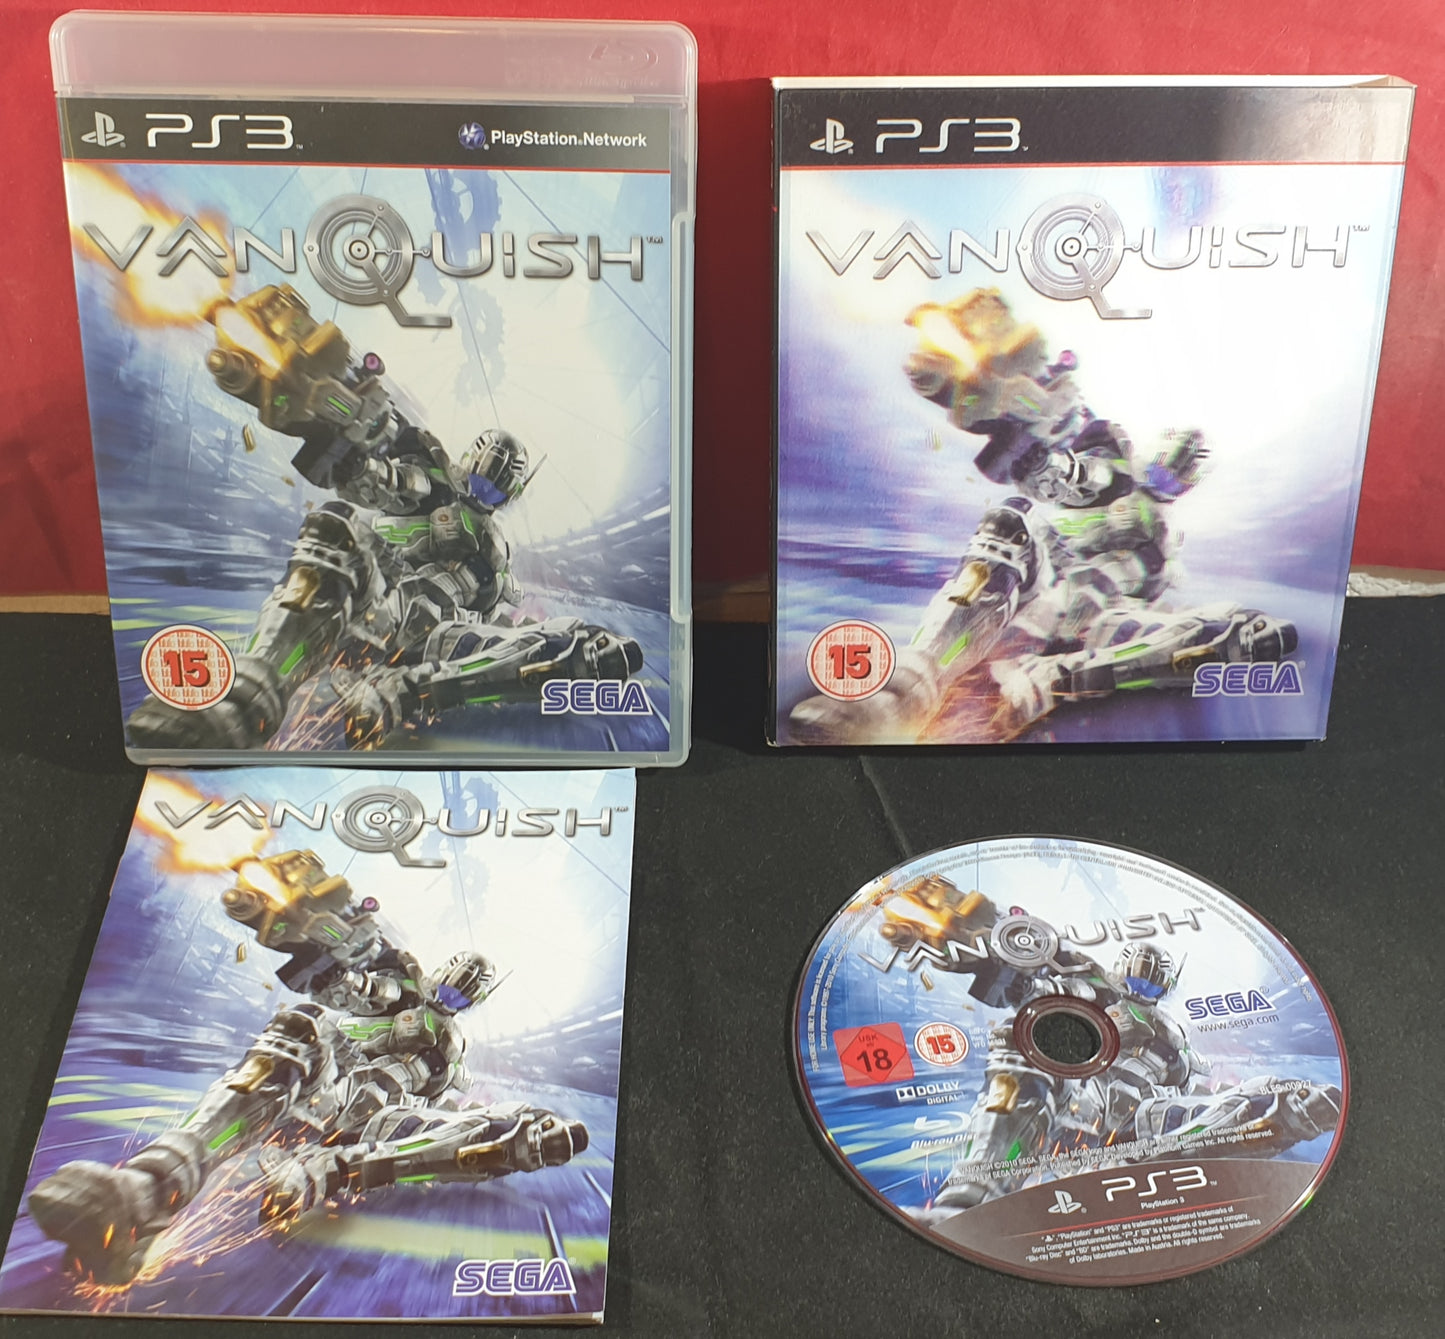 Vanquish with Holographic Sleeve Sony Playstation 3 (PS3) Game